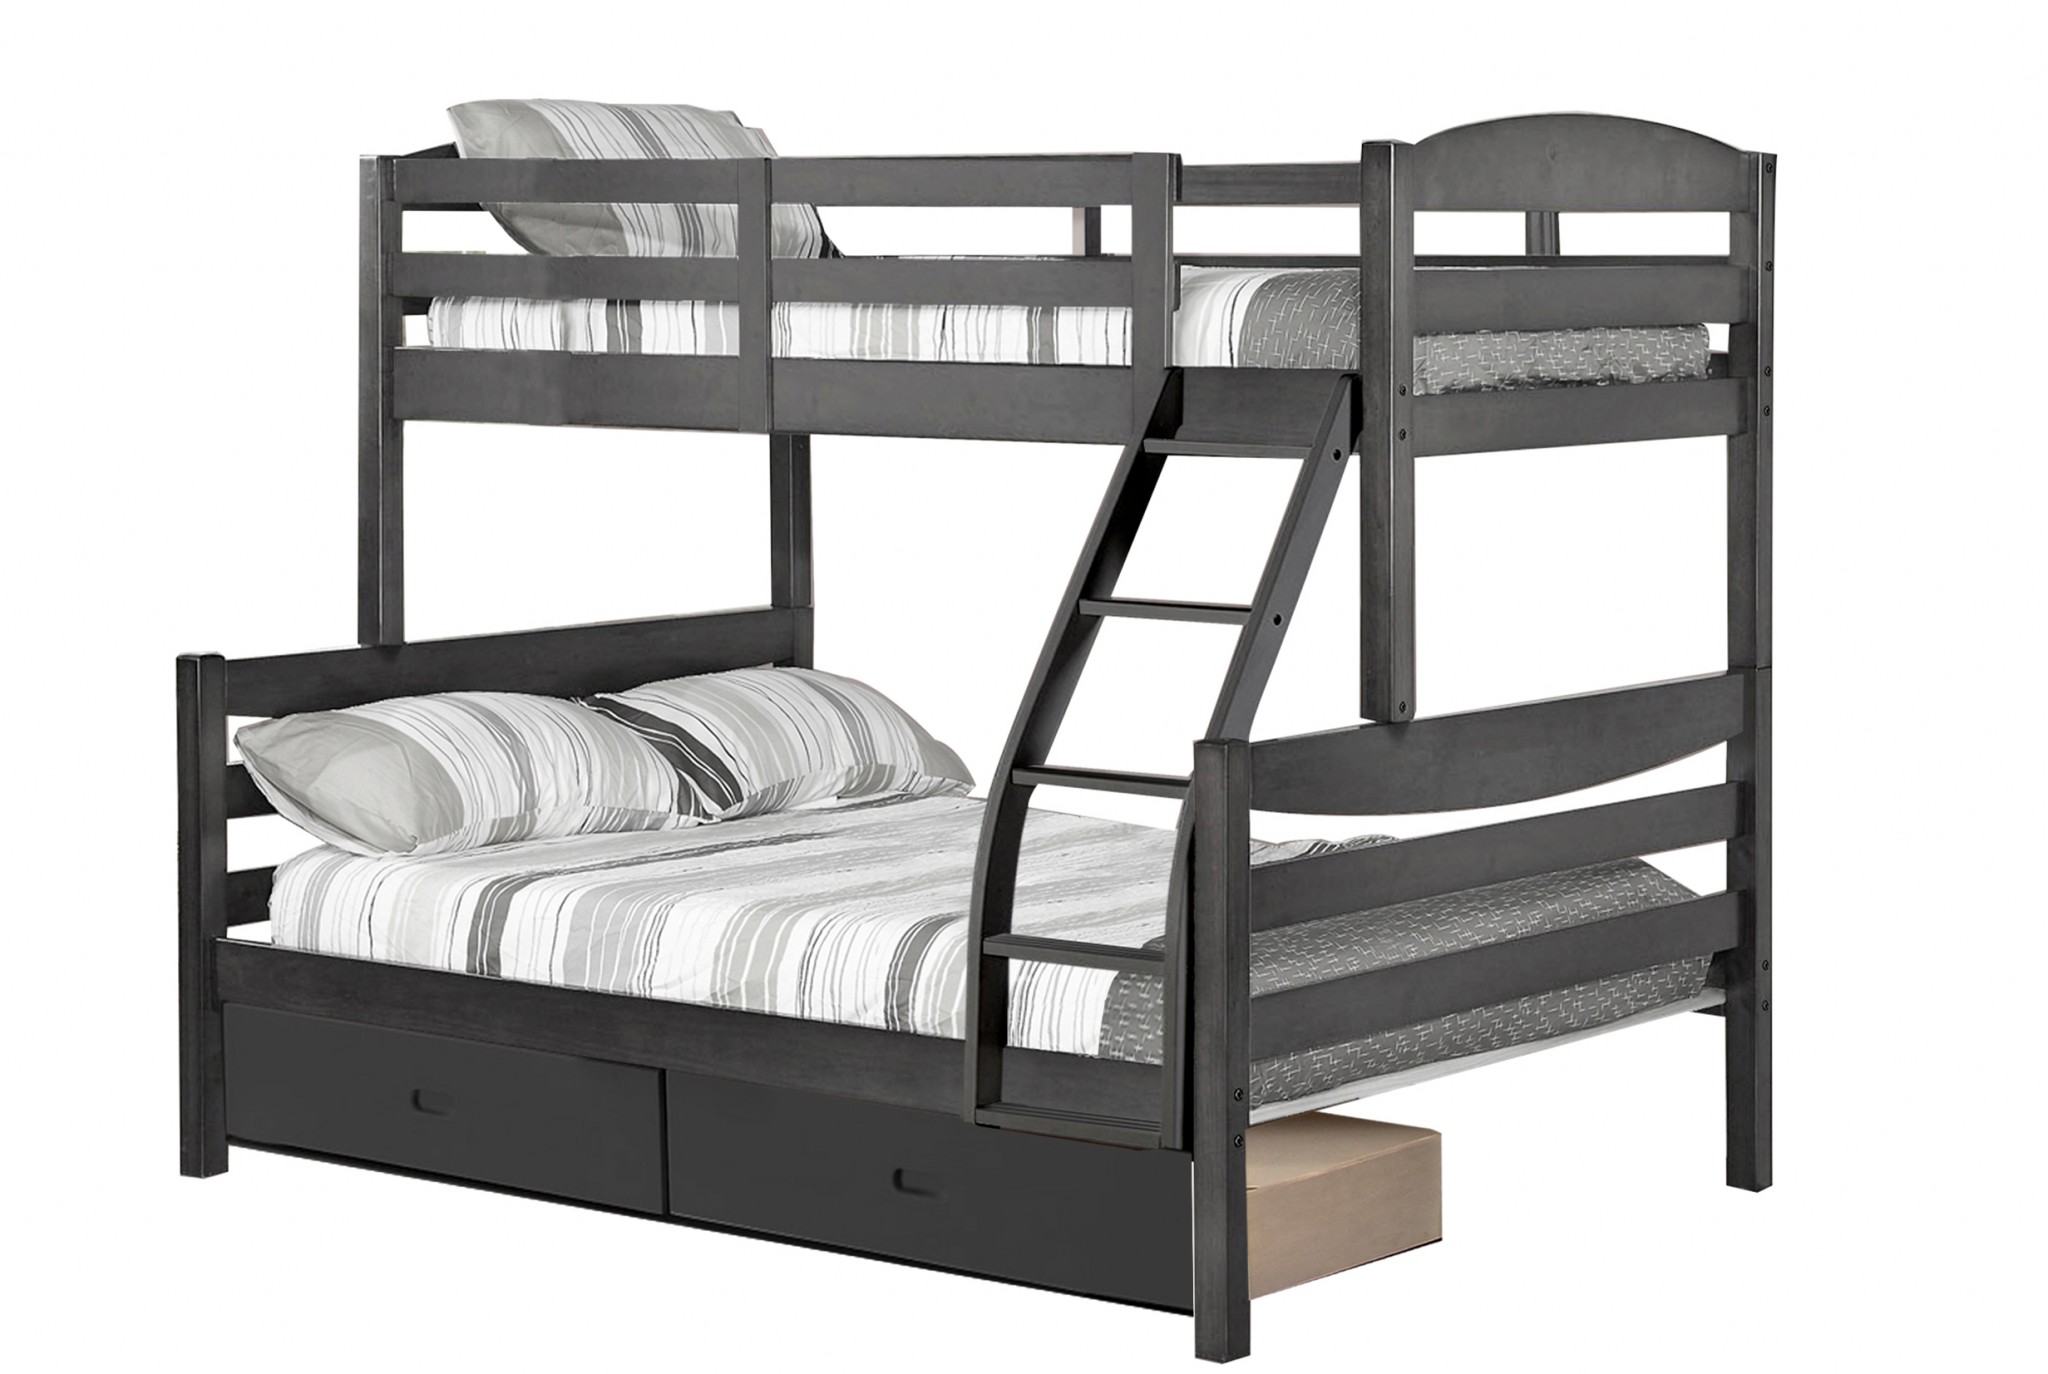 81" X 42.5-57.25" X 66.75" Grey Solid and Manufactured Wood Twin or Full Bunk Bed with 2 Drawers